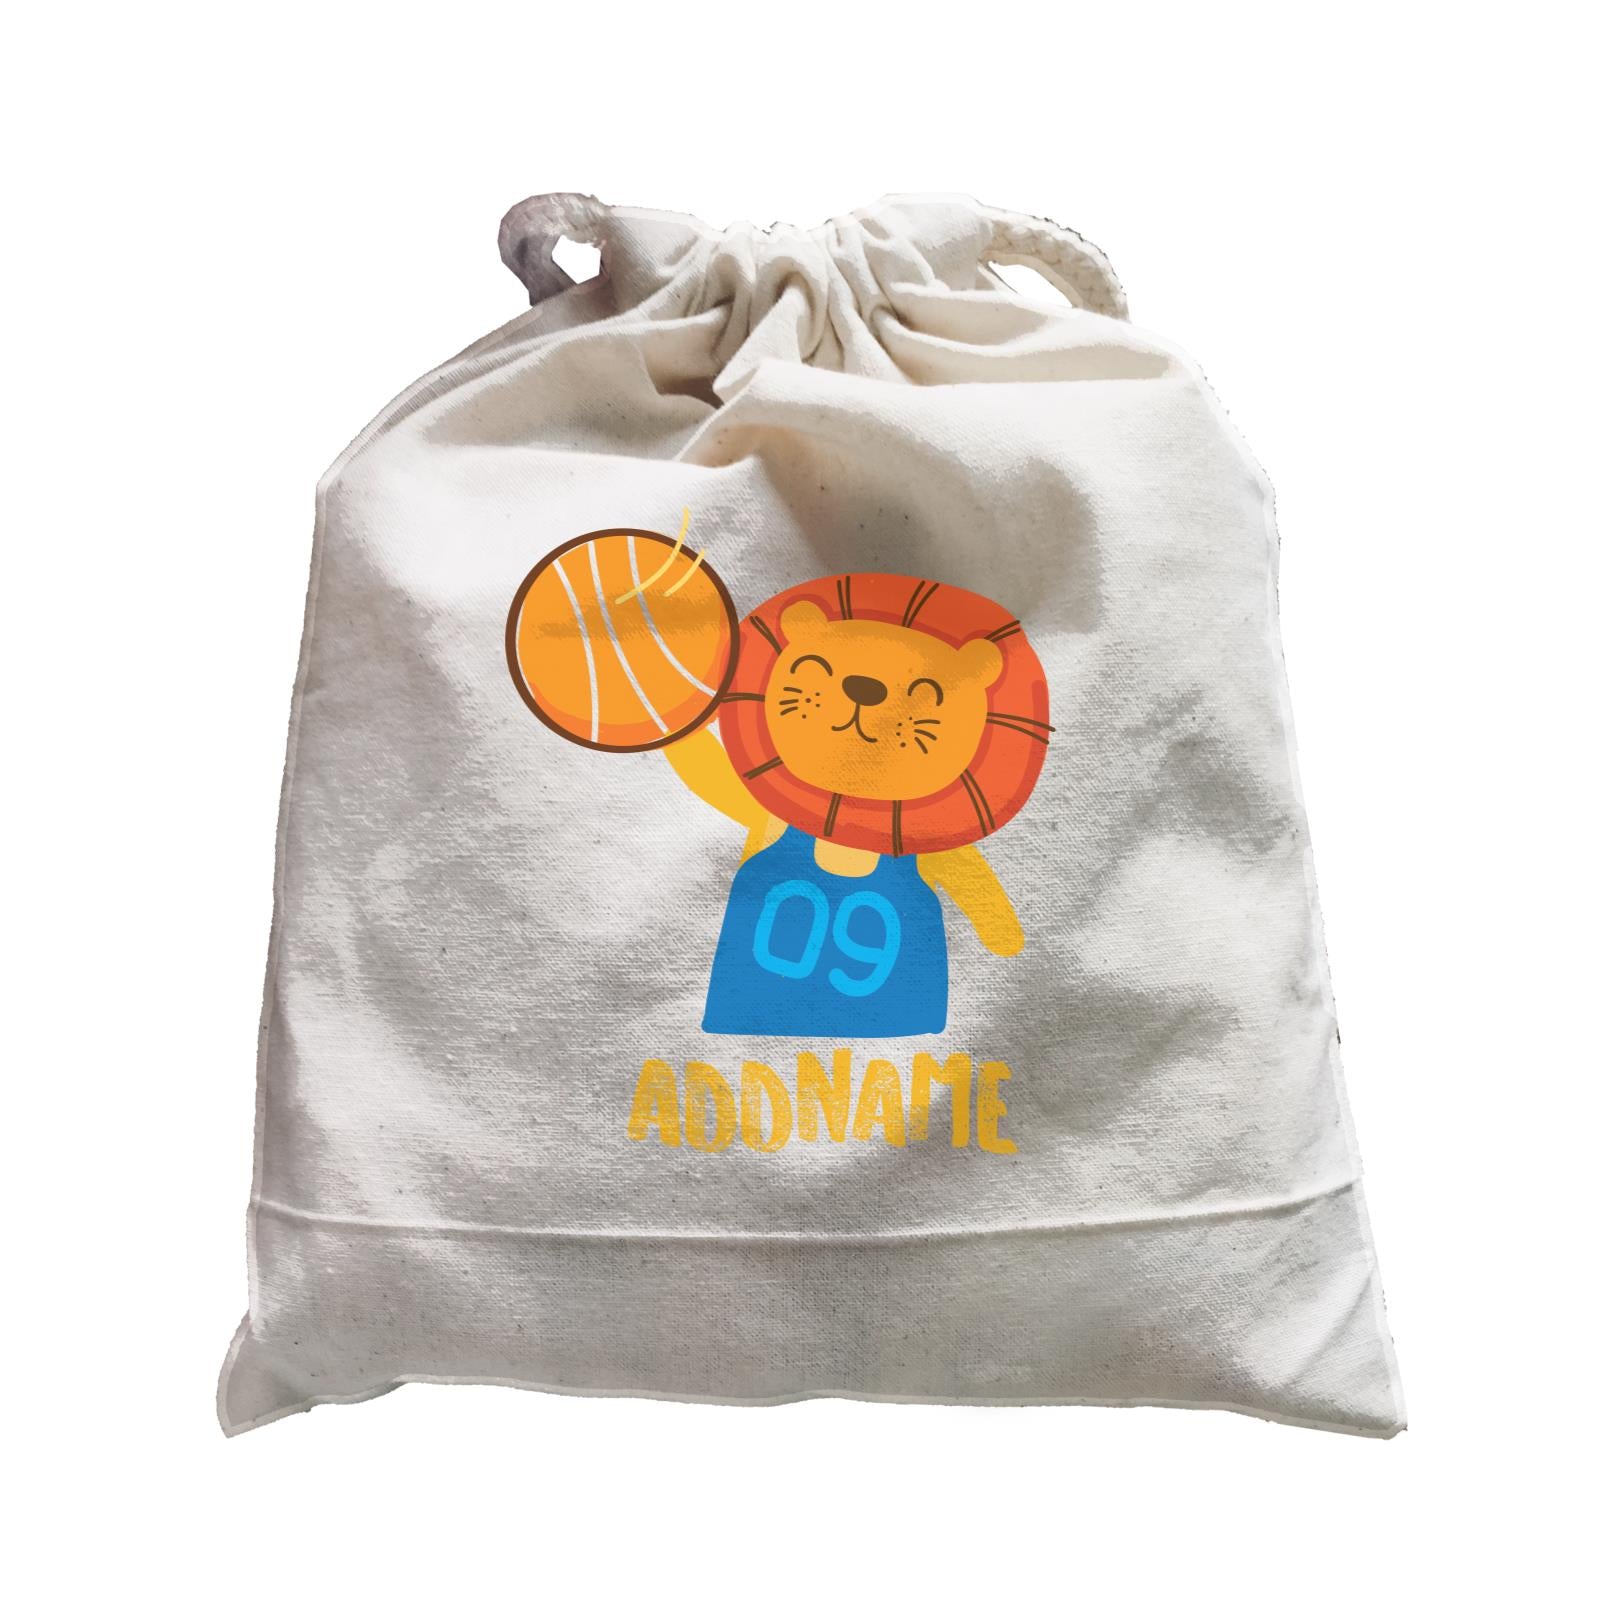 Cool Cute Animals Lion Basketball Player Addname Satchel